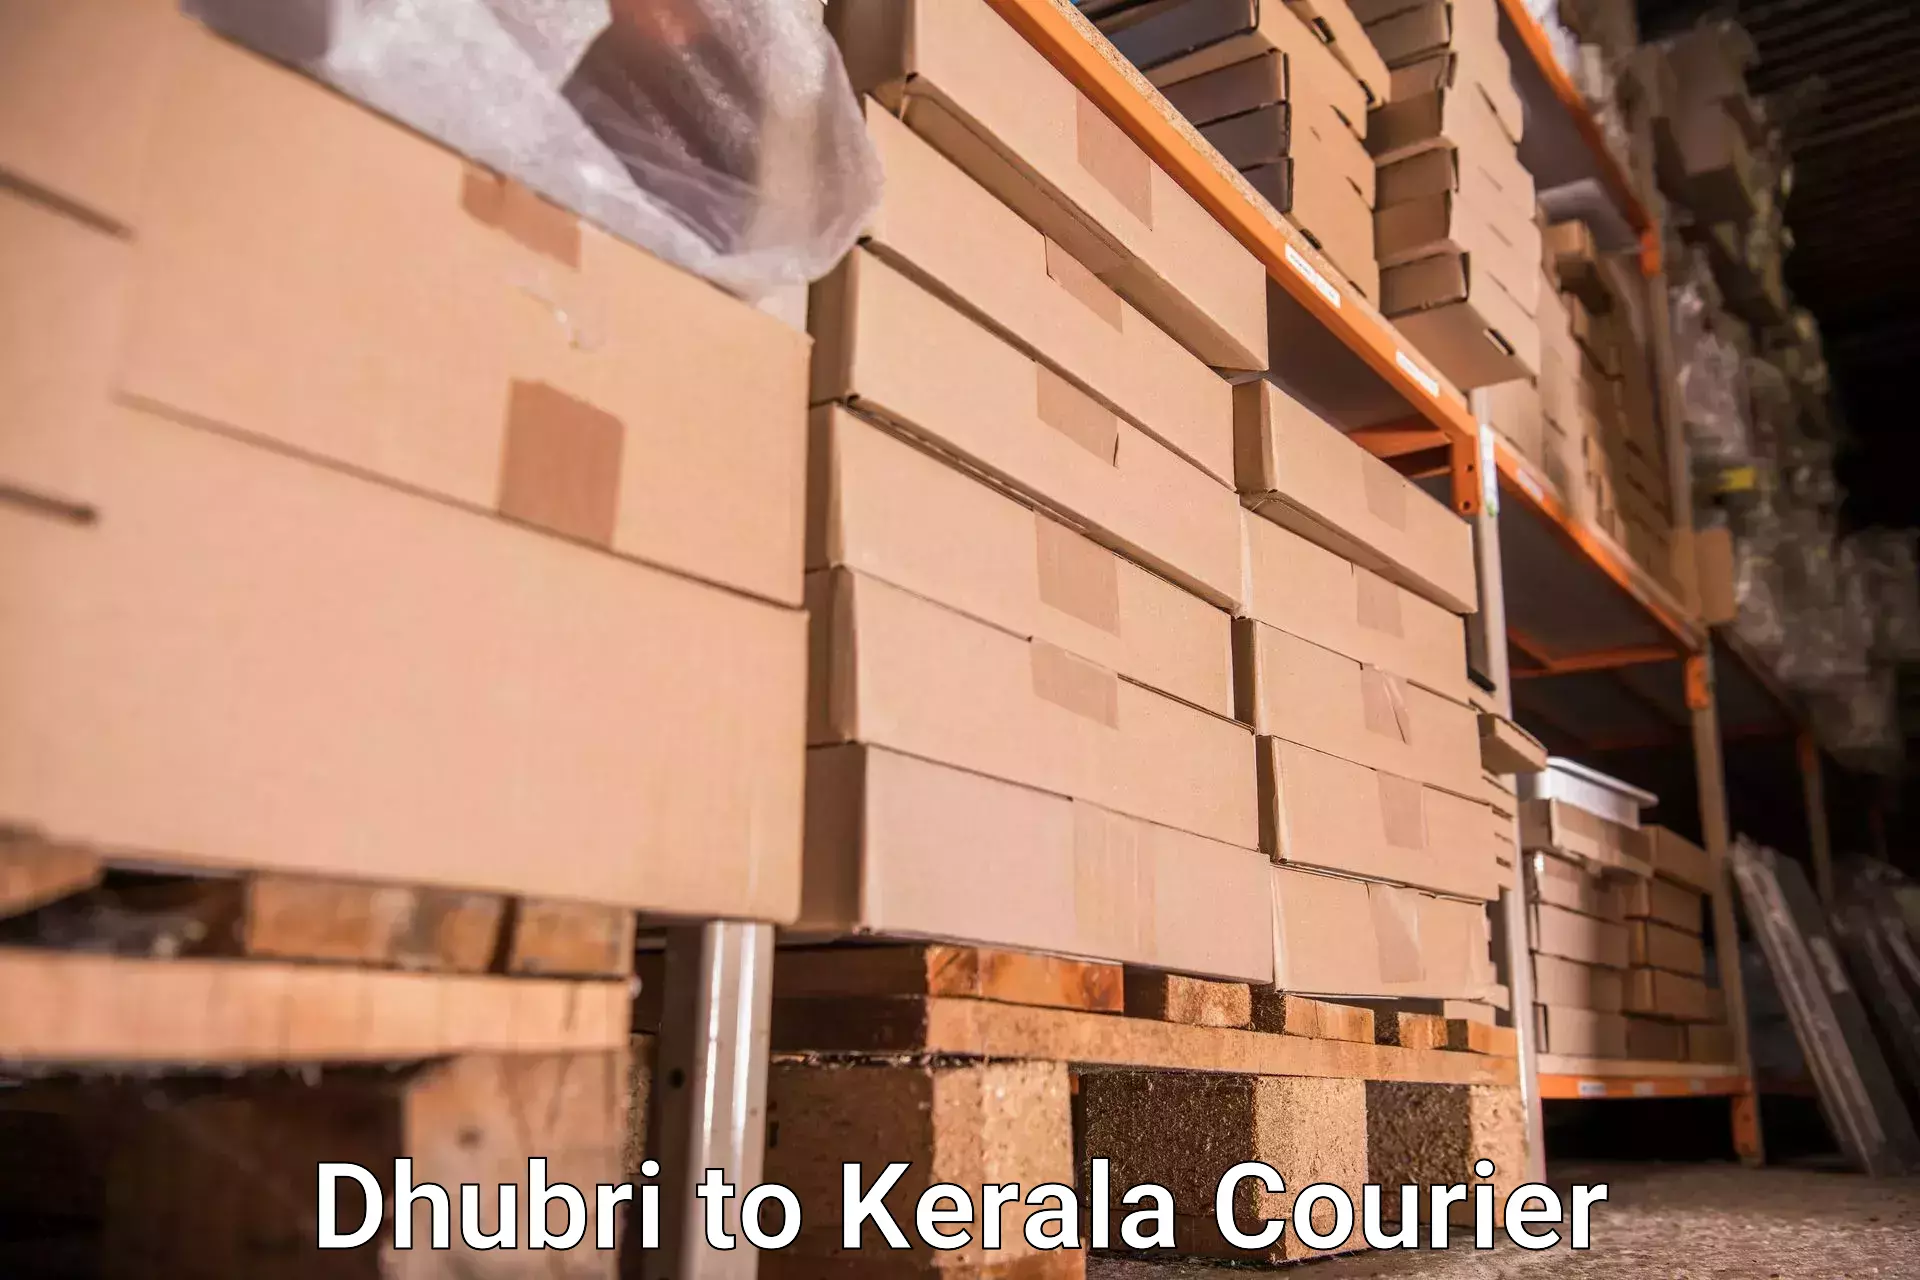 Personal effects shipping Dhubri to Munnar